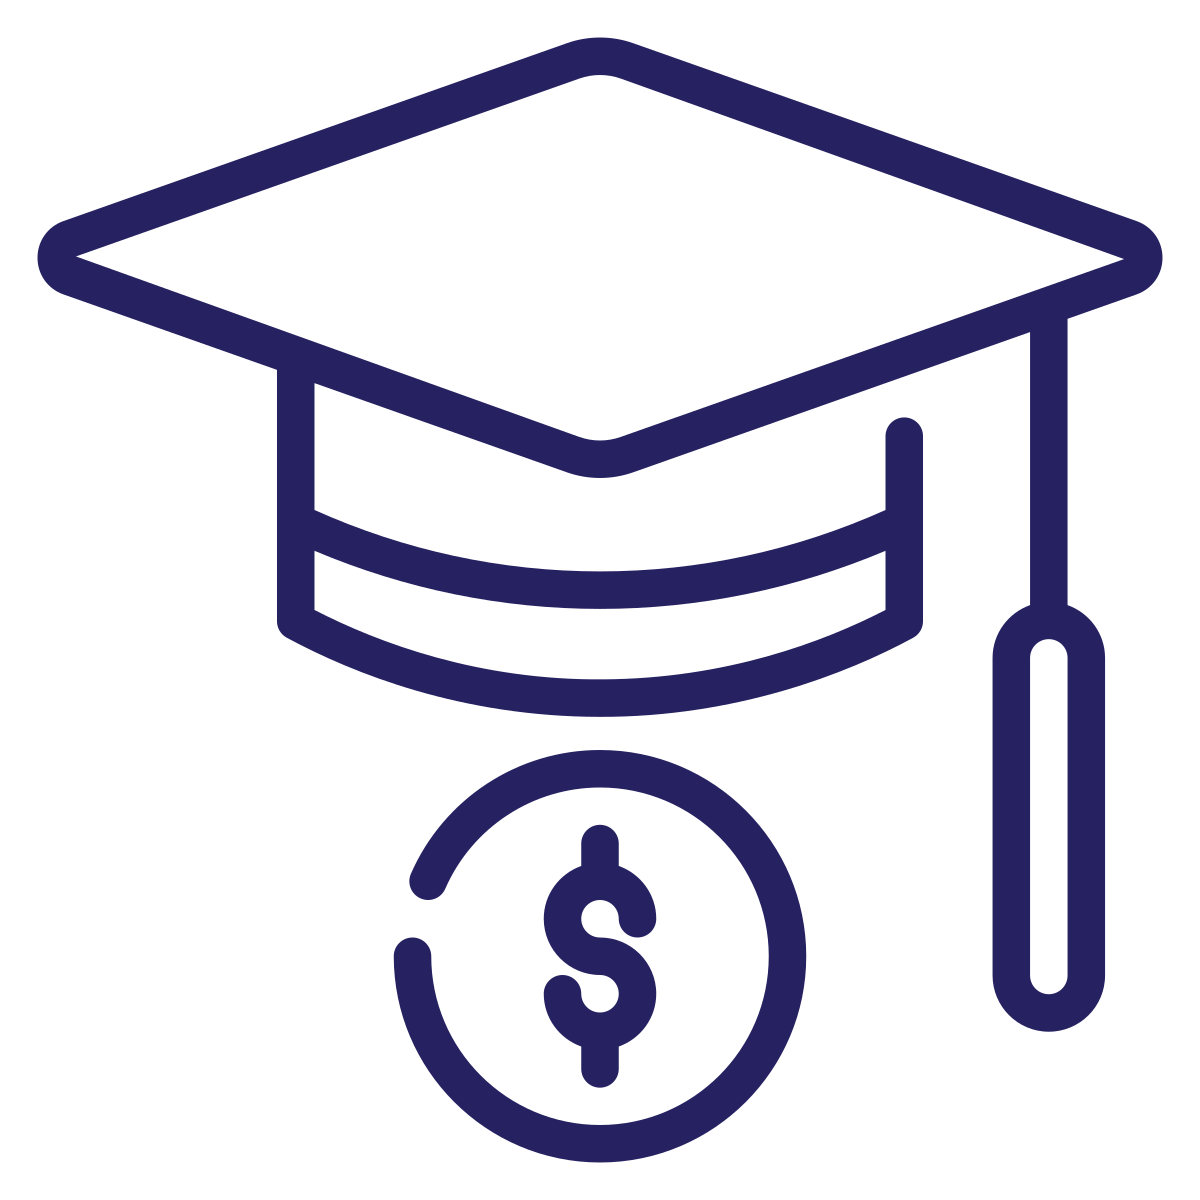 Icon with graduation cap and dollar sign